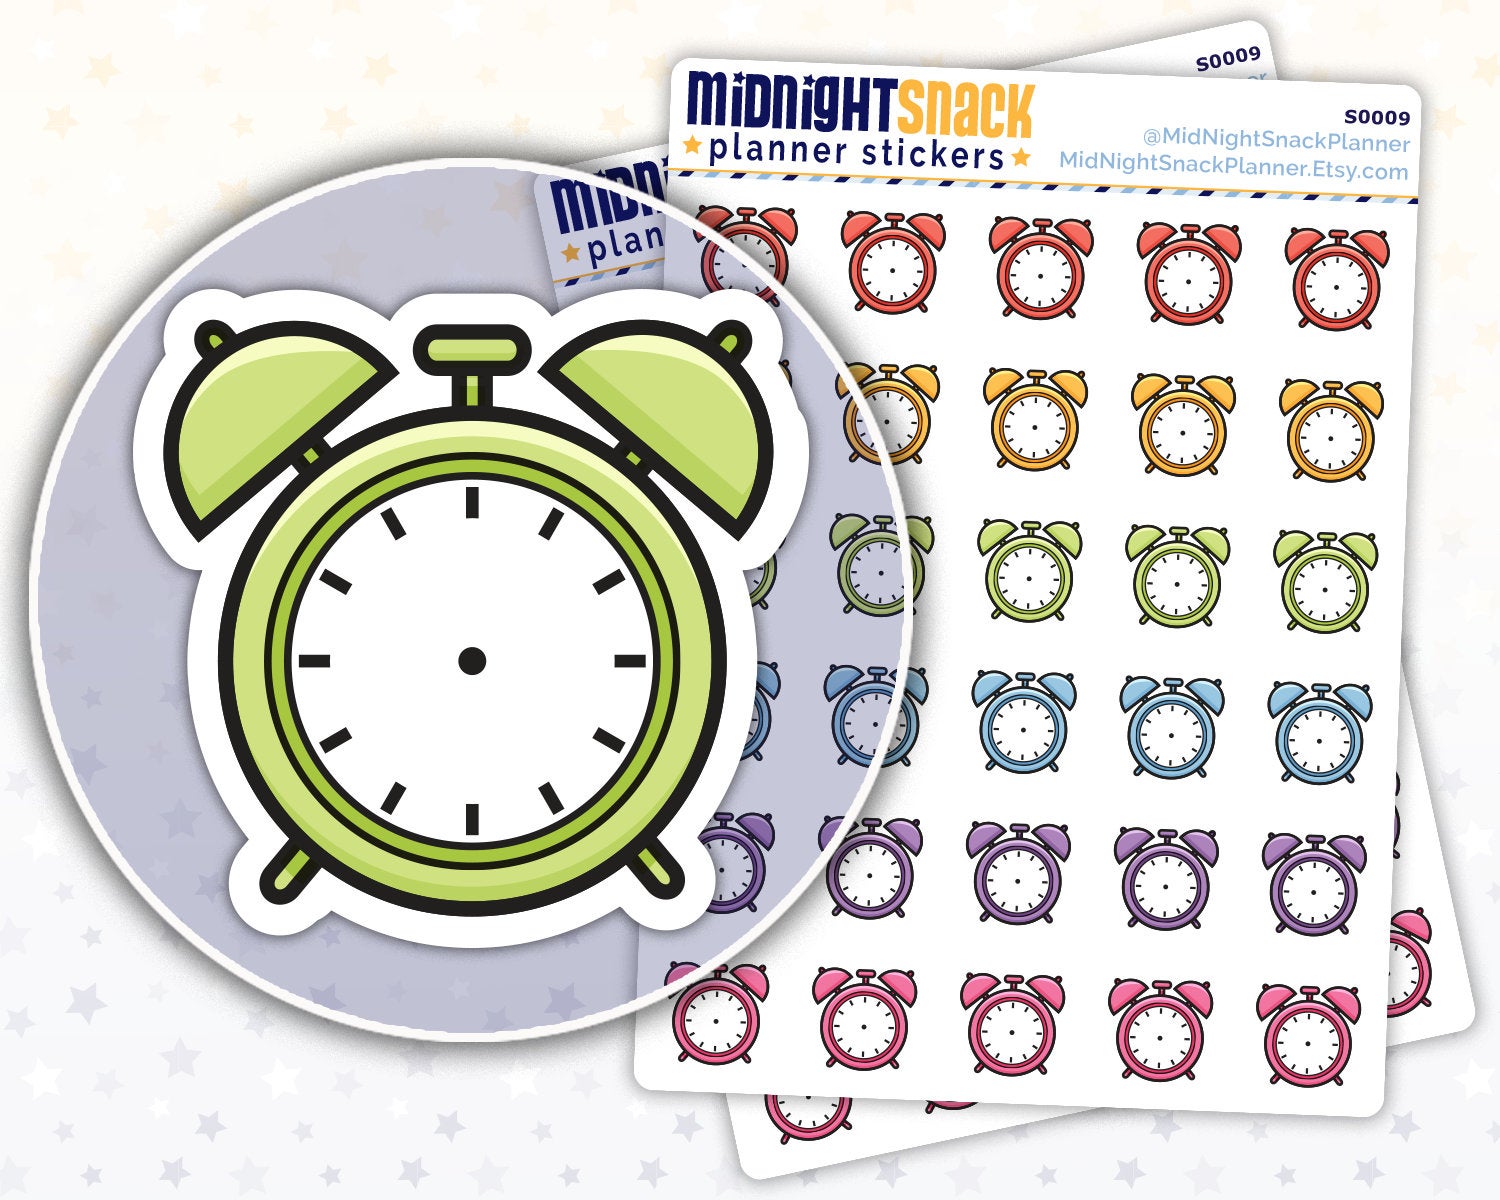 Alarm Clock Icon: Appointment Reminder Planner Stickers Midnight Snack Planner